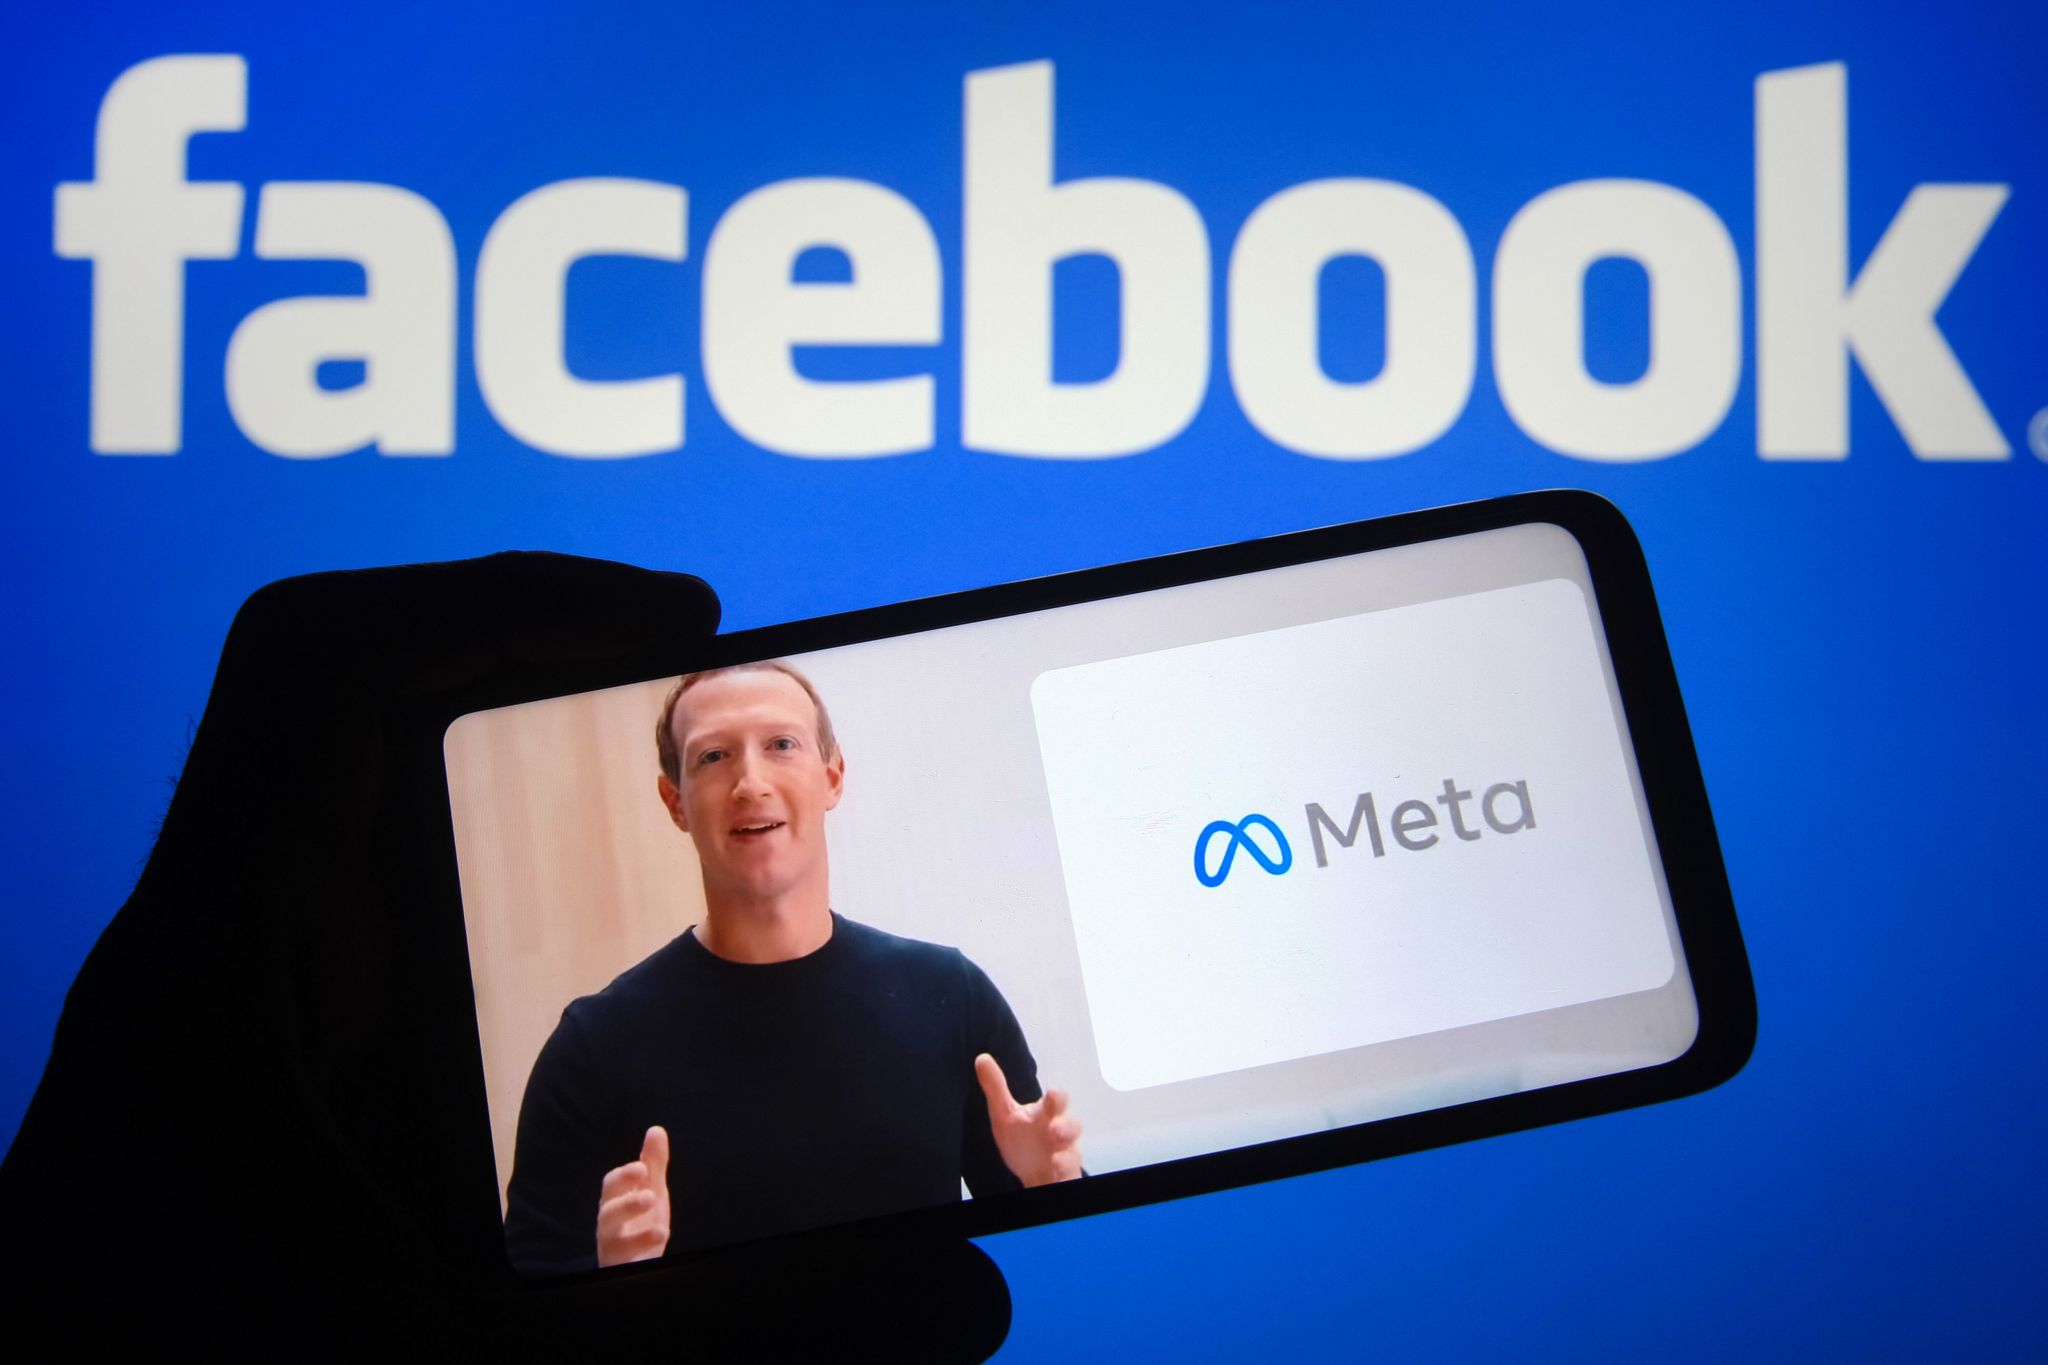 Mark Zuckerberg announcing the launch of meta on a phone